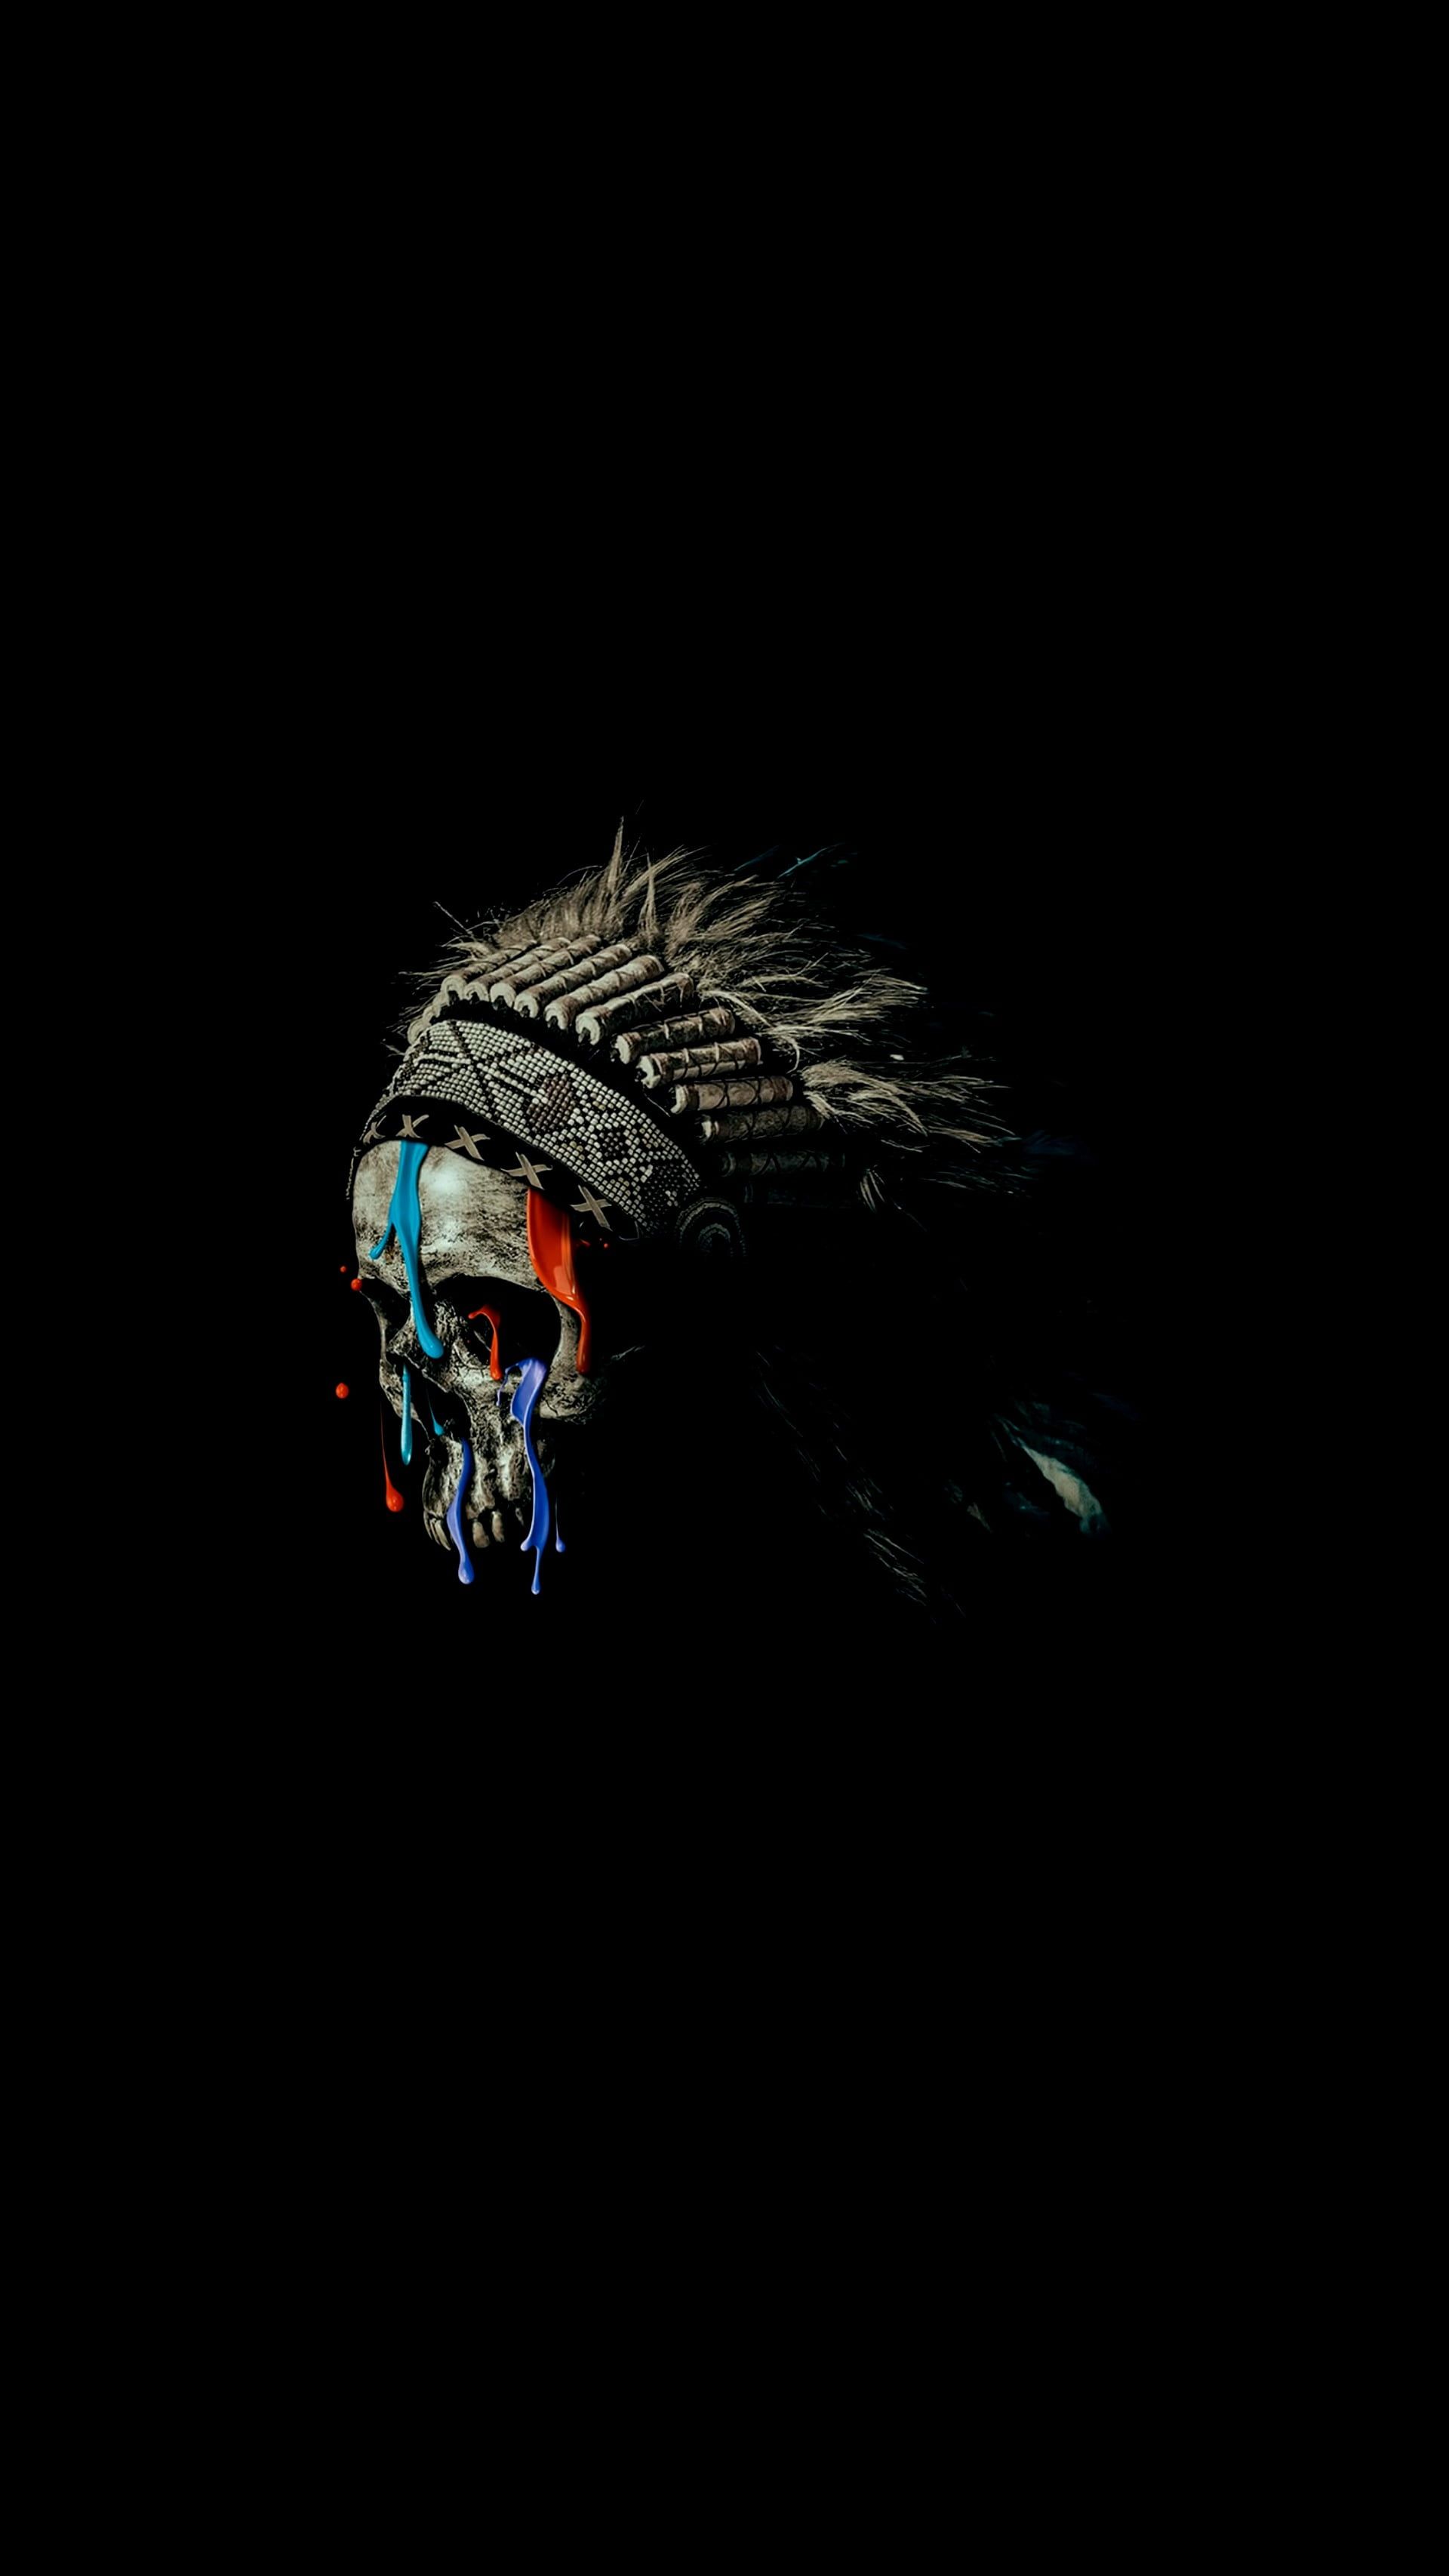 white and multicolored skull with war bonnet illustration black background # minimalism. Skull wallpaper iphone, iPhone wallpaper image, Native american wallpaper